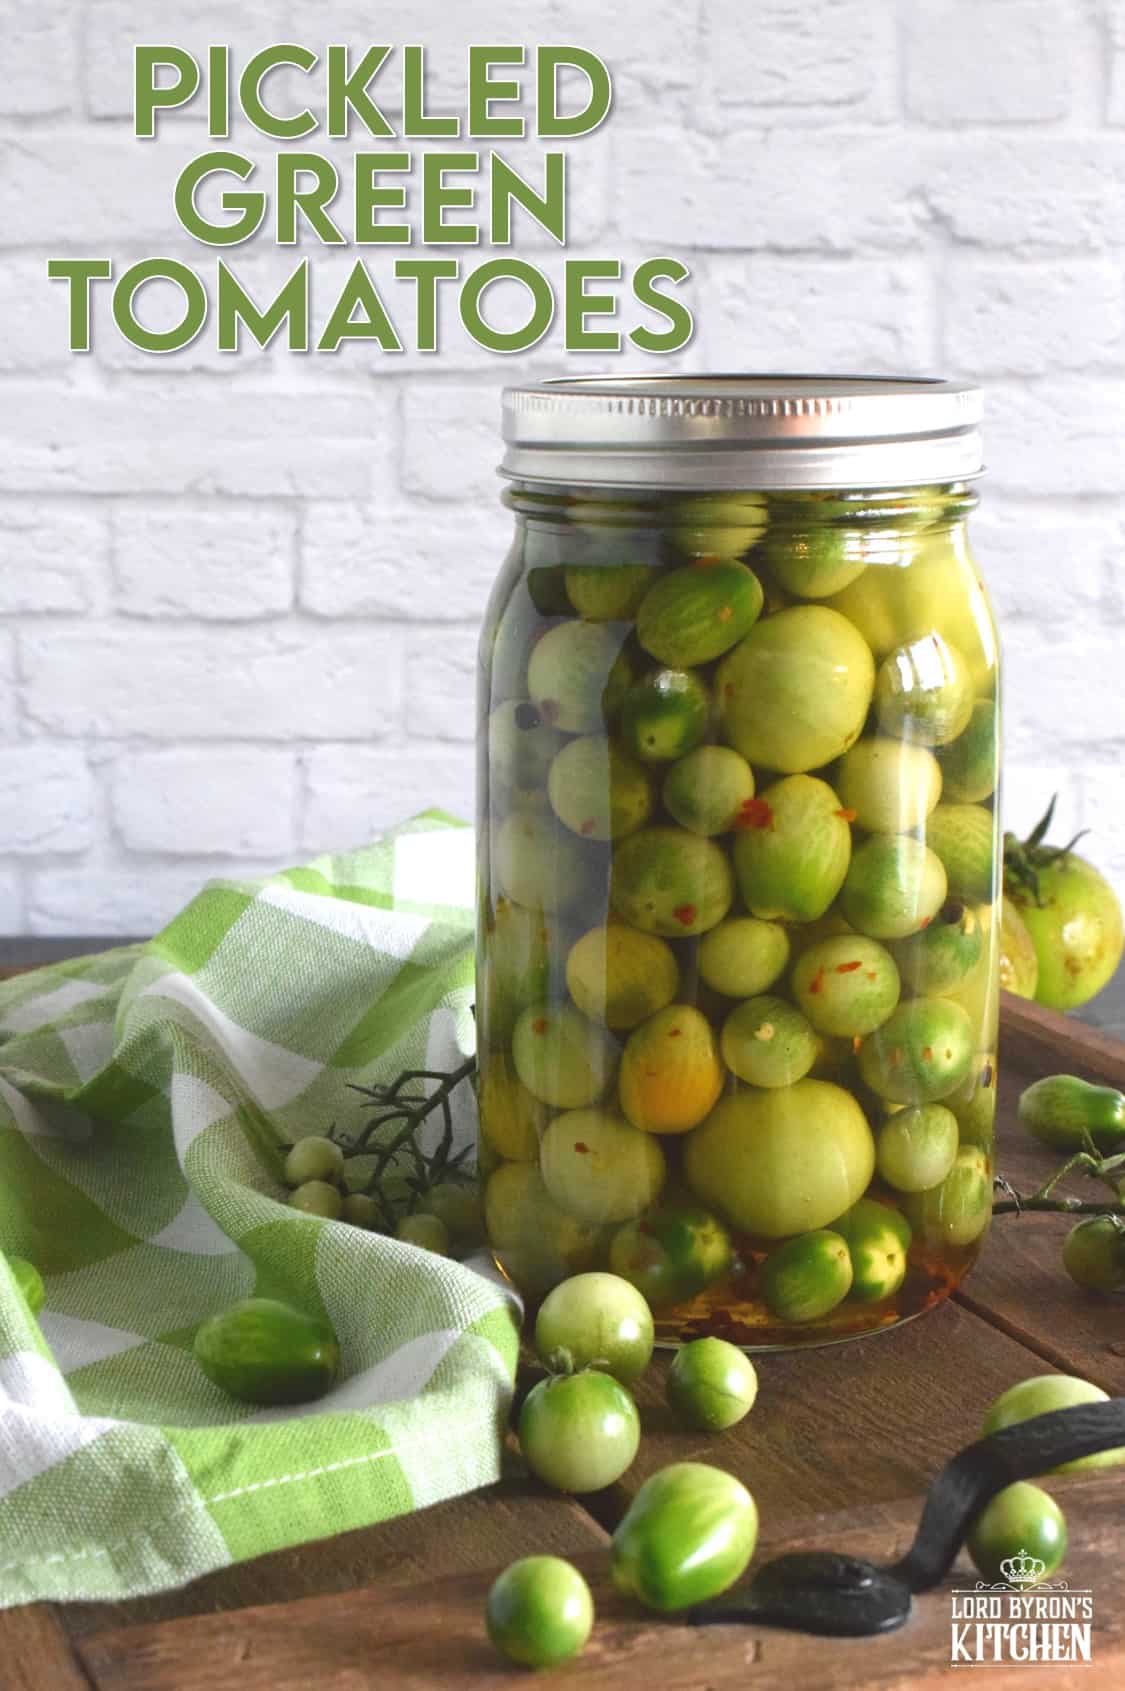 Pickling process of green tomatoes with jars, boiling brine, and finished pickles